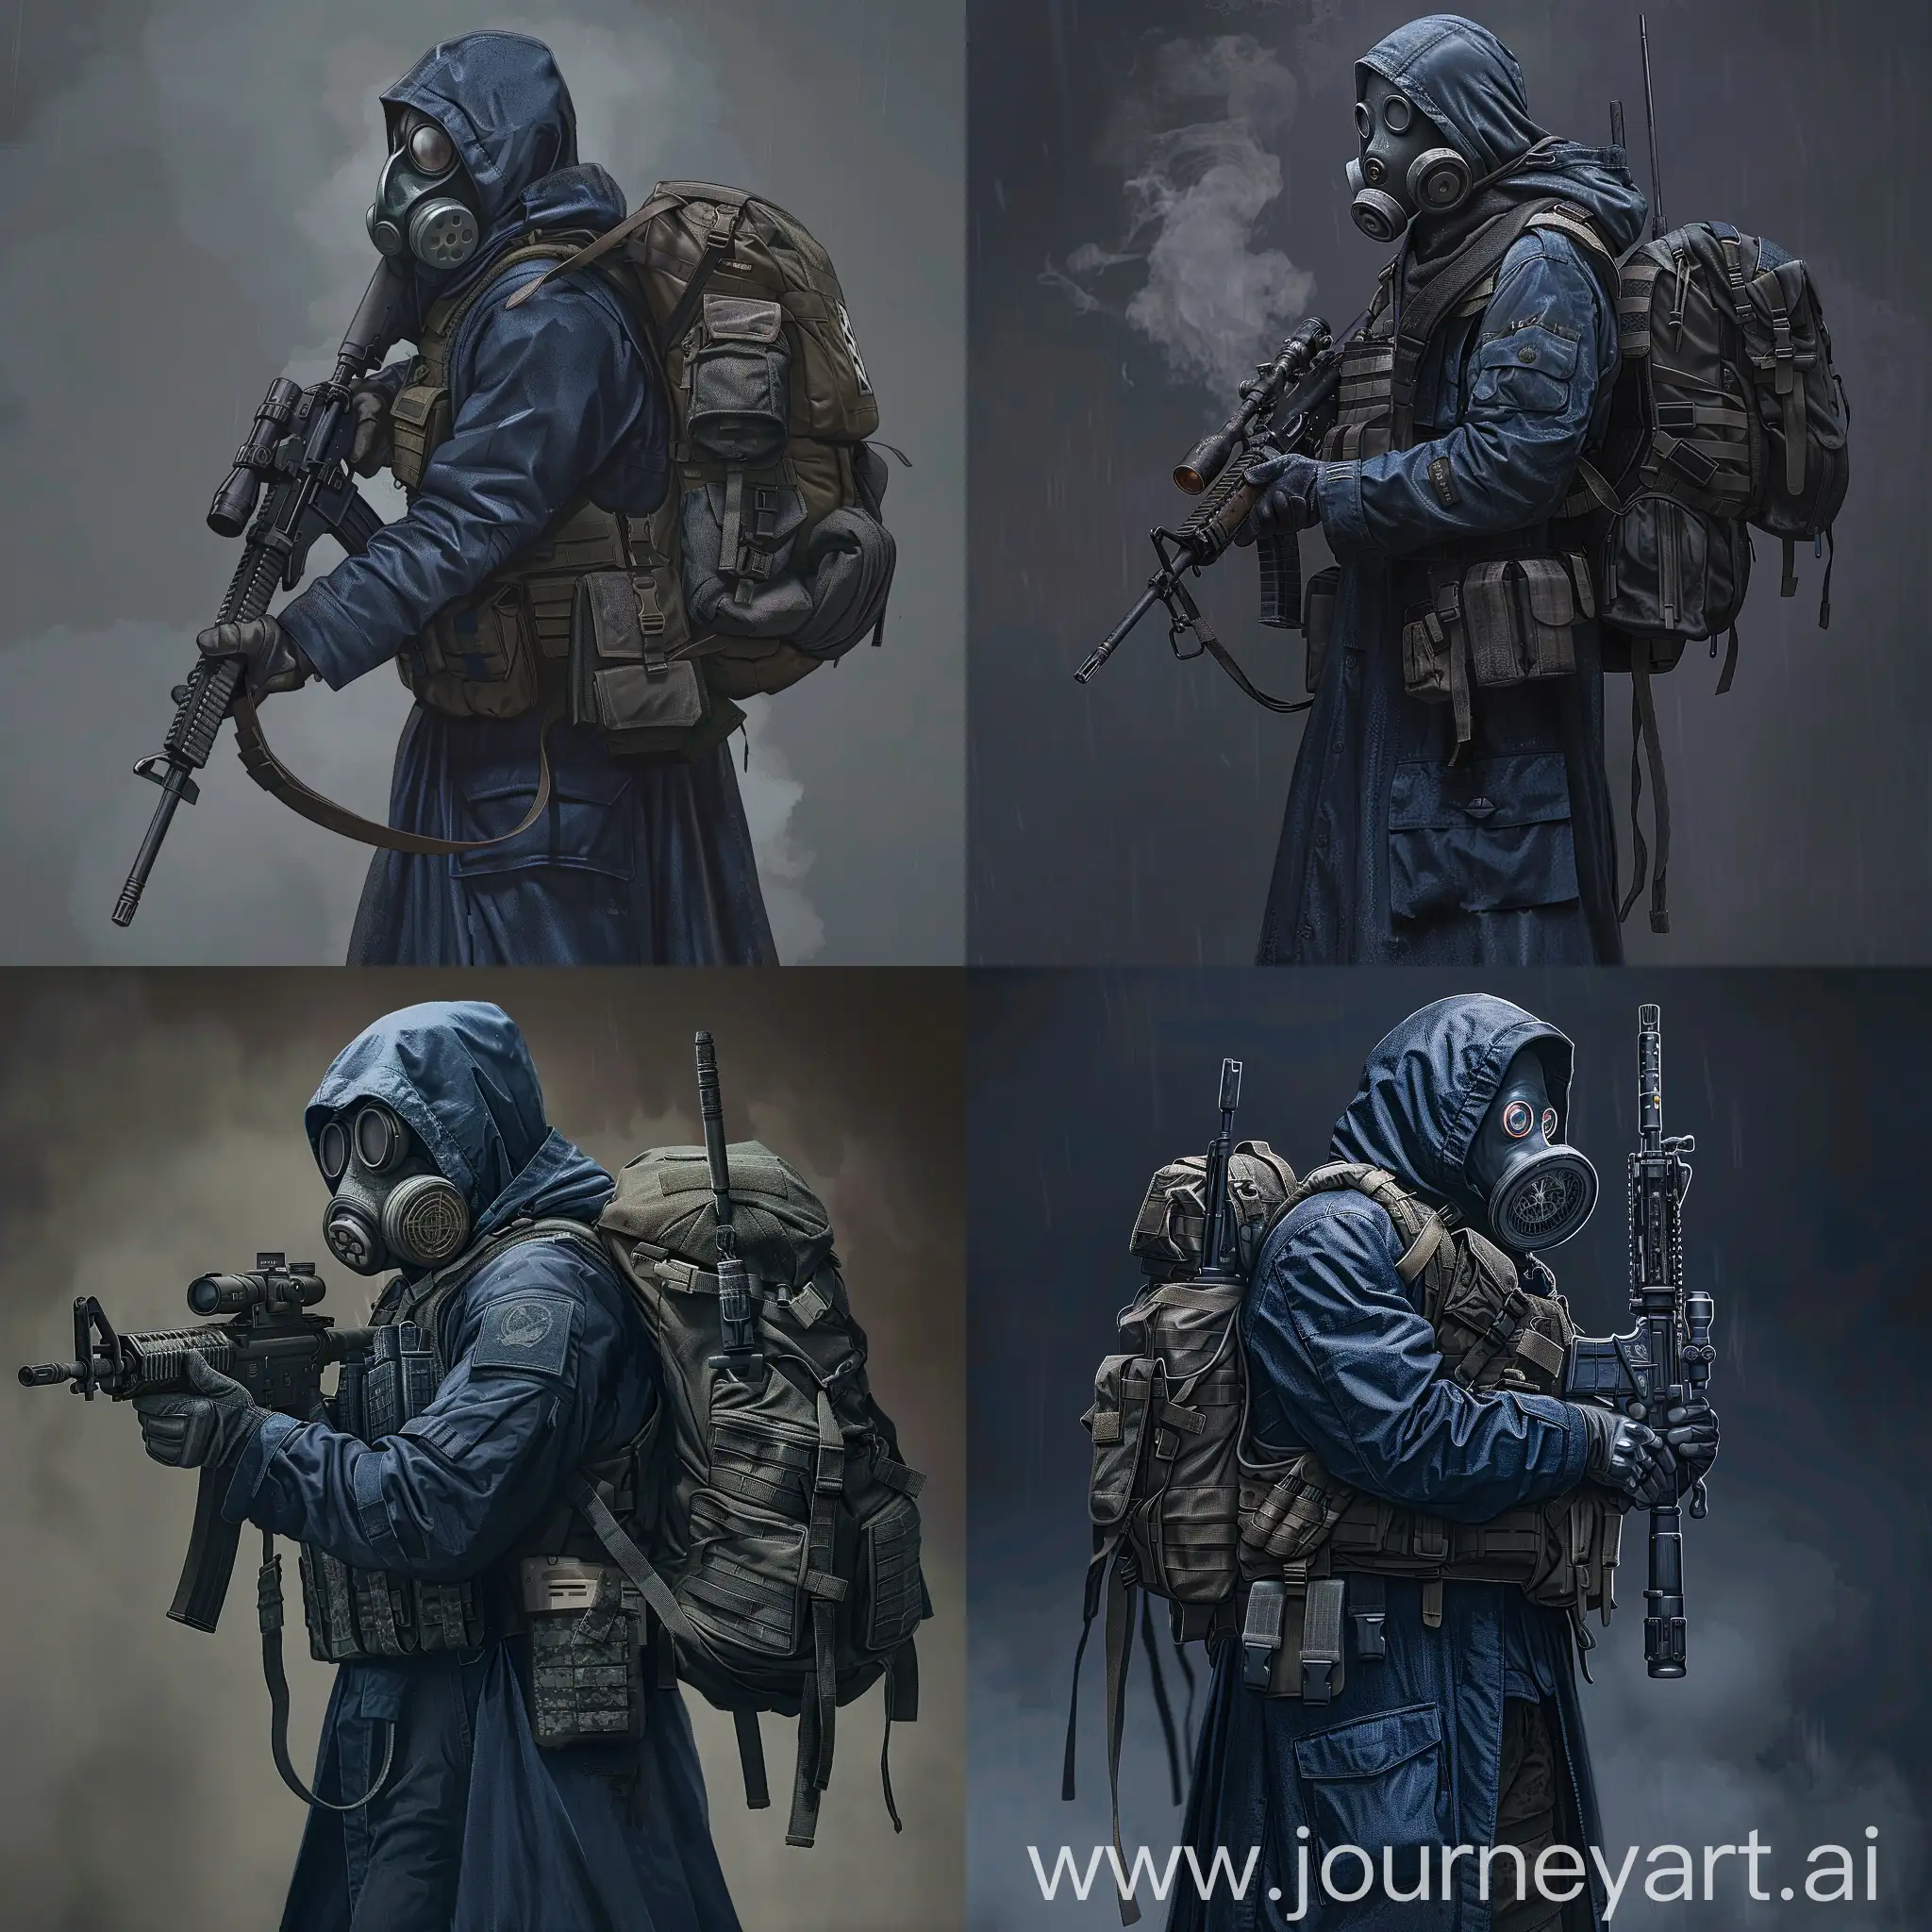 Digital design art, character concept art, mercenary from the universe of S.T.A.L.K.E.R., dressed in a dark blue military raincoat, gray military armor on his body, a gasmask on his face, a military backpack on his back, a rifle in his hands.